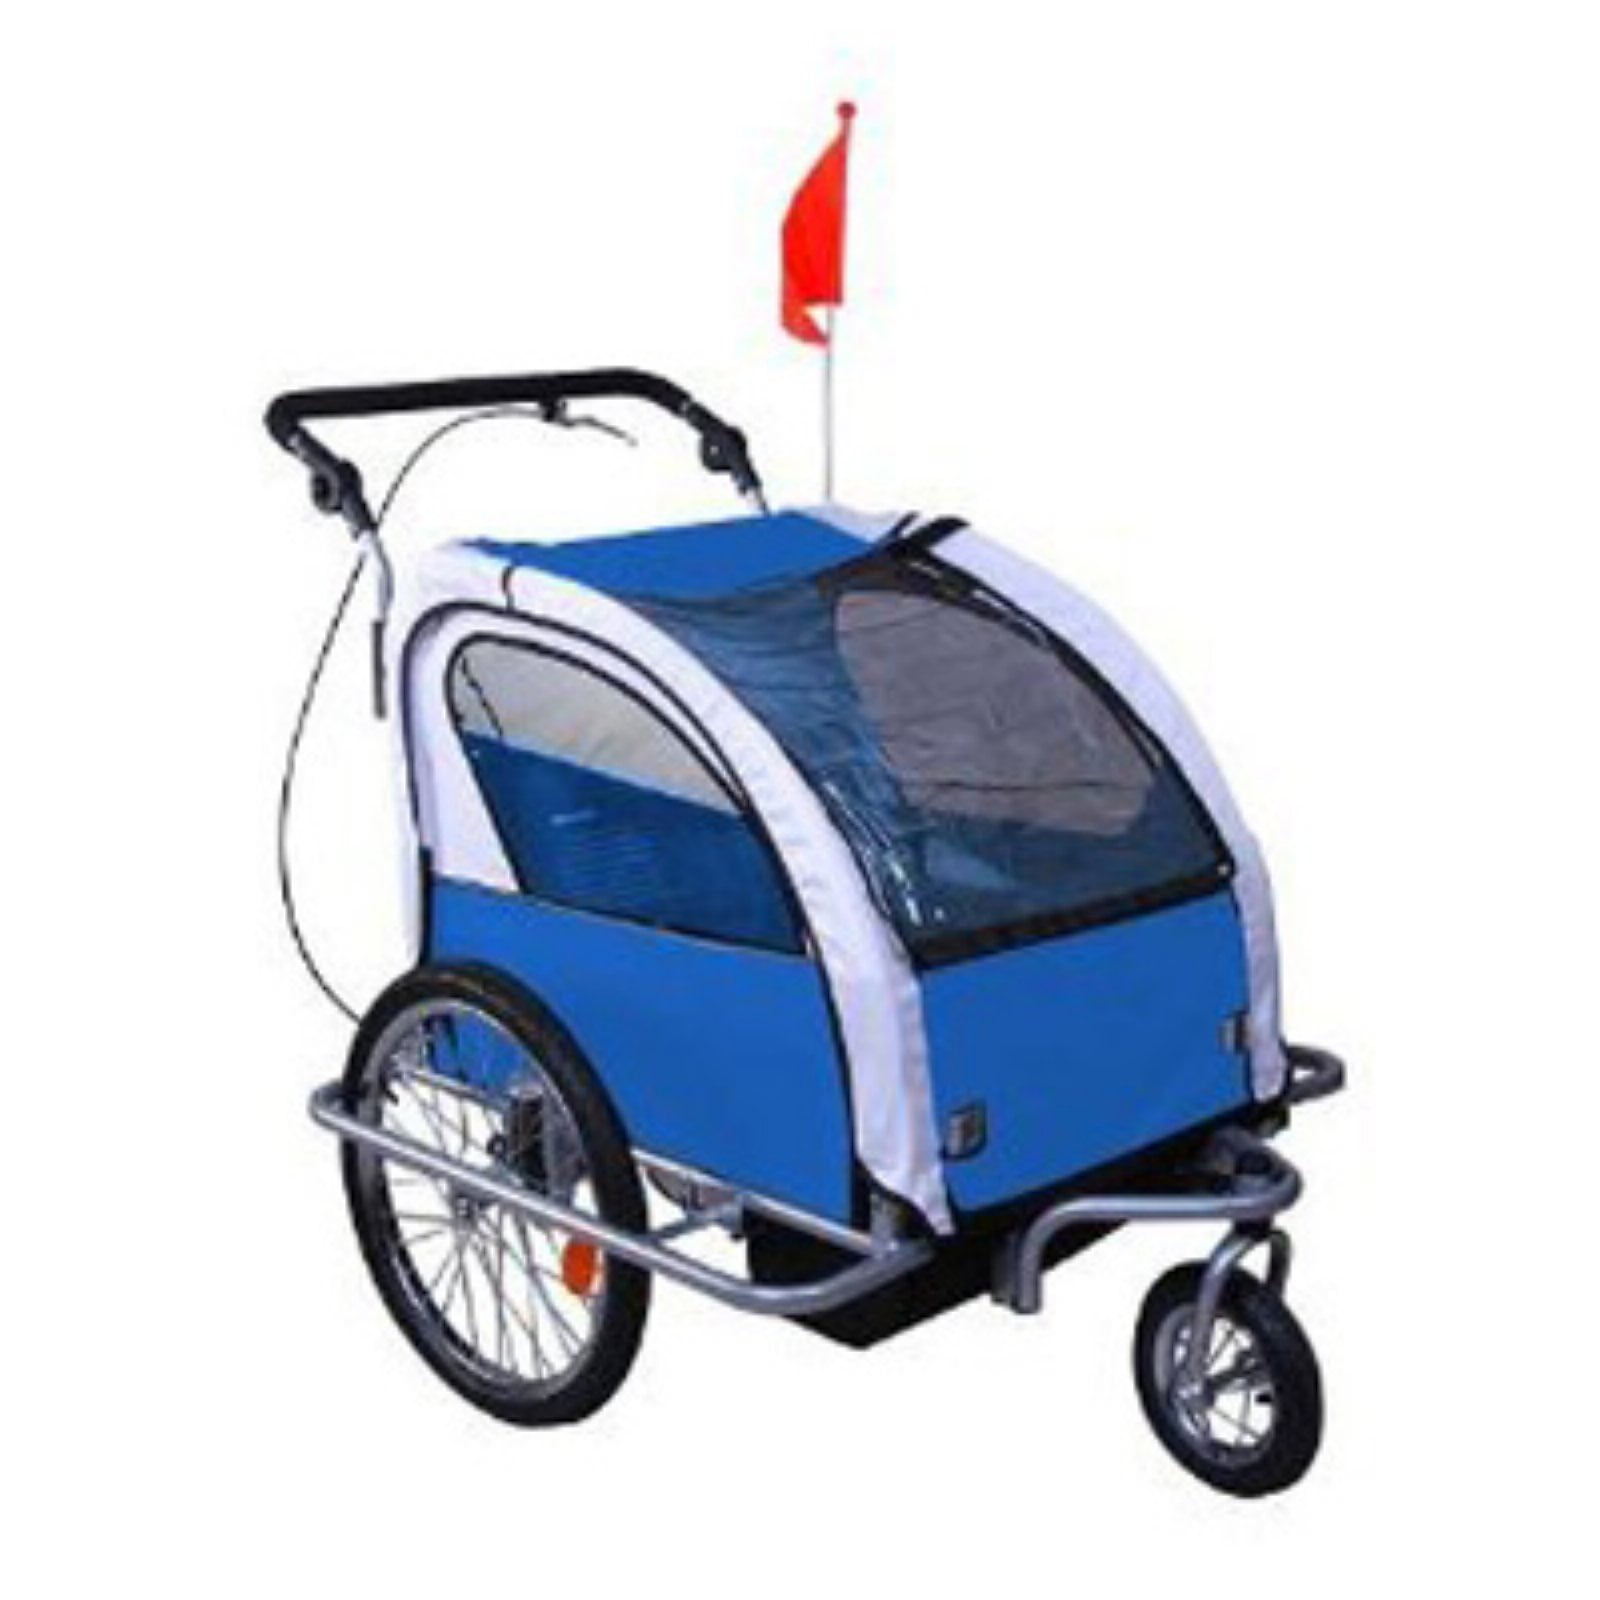 Aosom 2IN1 Double Baby Bike Trailer Stroller Jogger Child Two-Wheel Bicycle Cargo Blue 